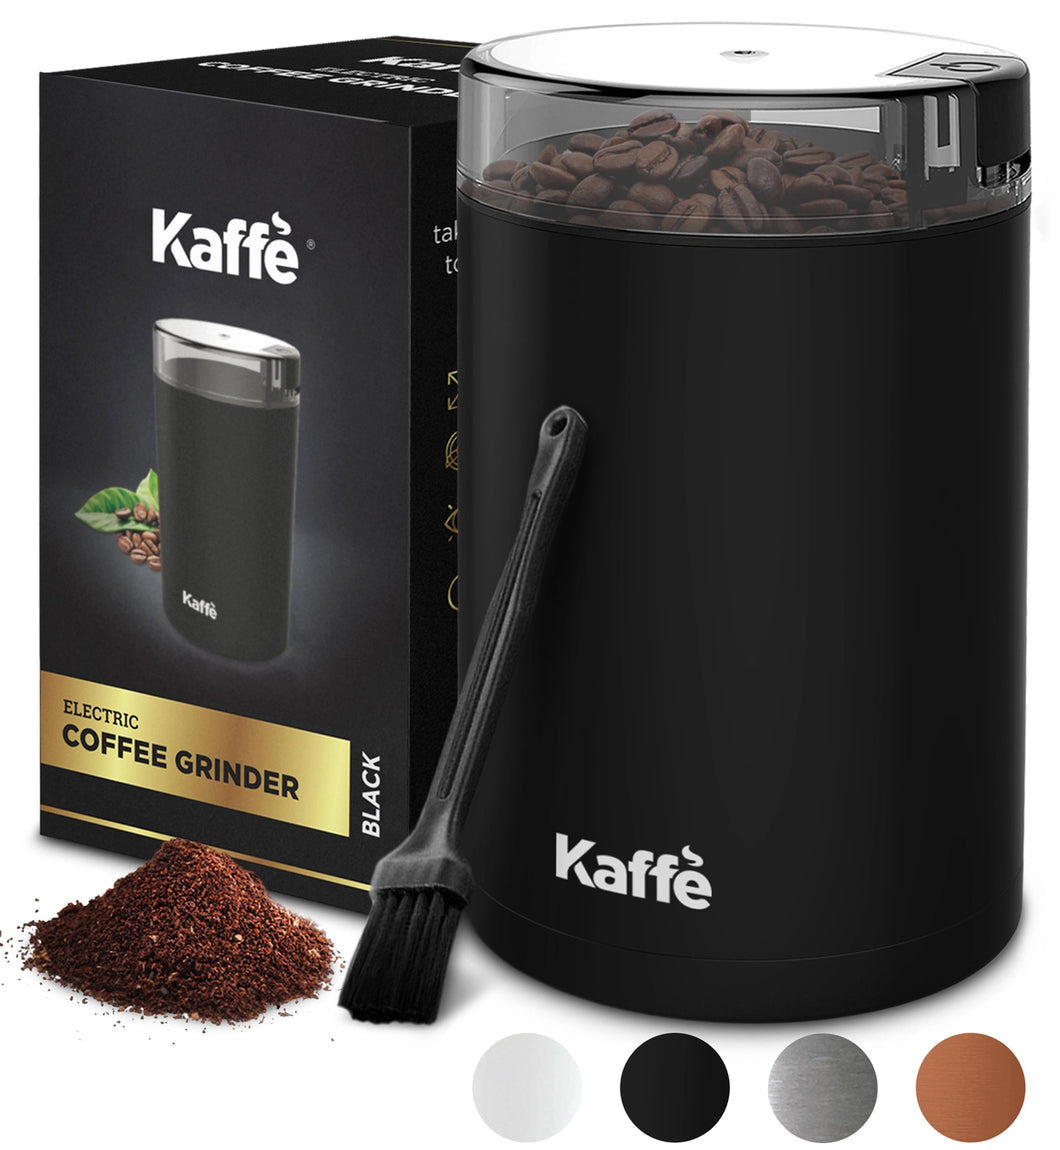 Kaffe 3.5 oz Electric Coffee Grinder w/ Cleaning Brush (4 colors)